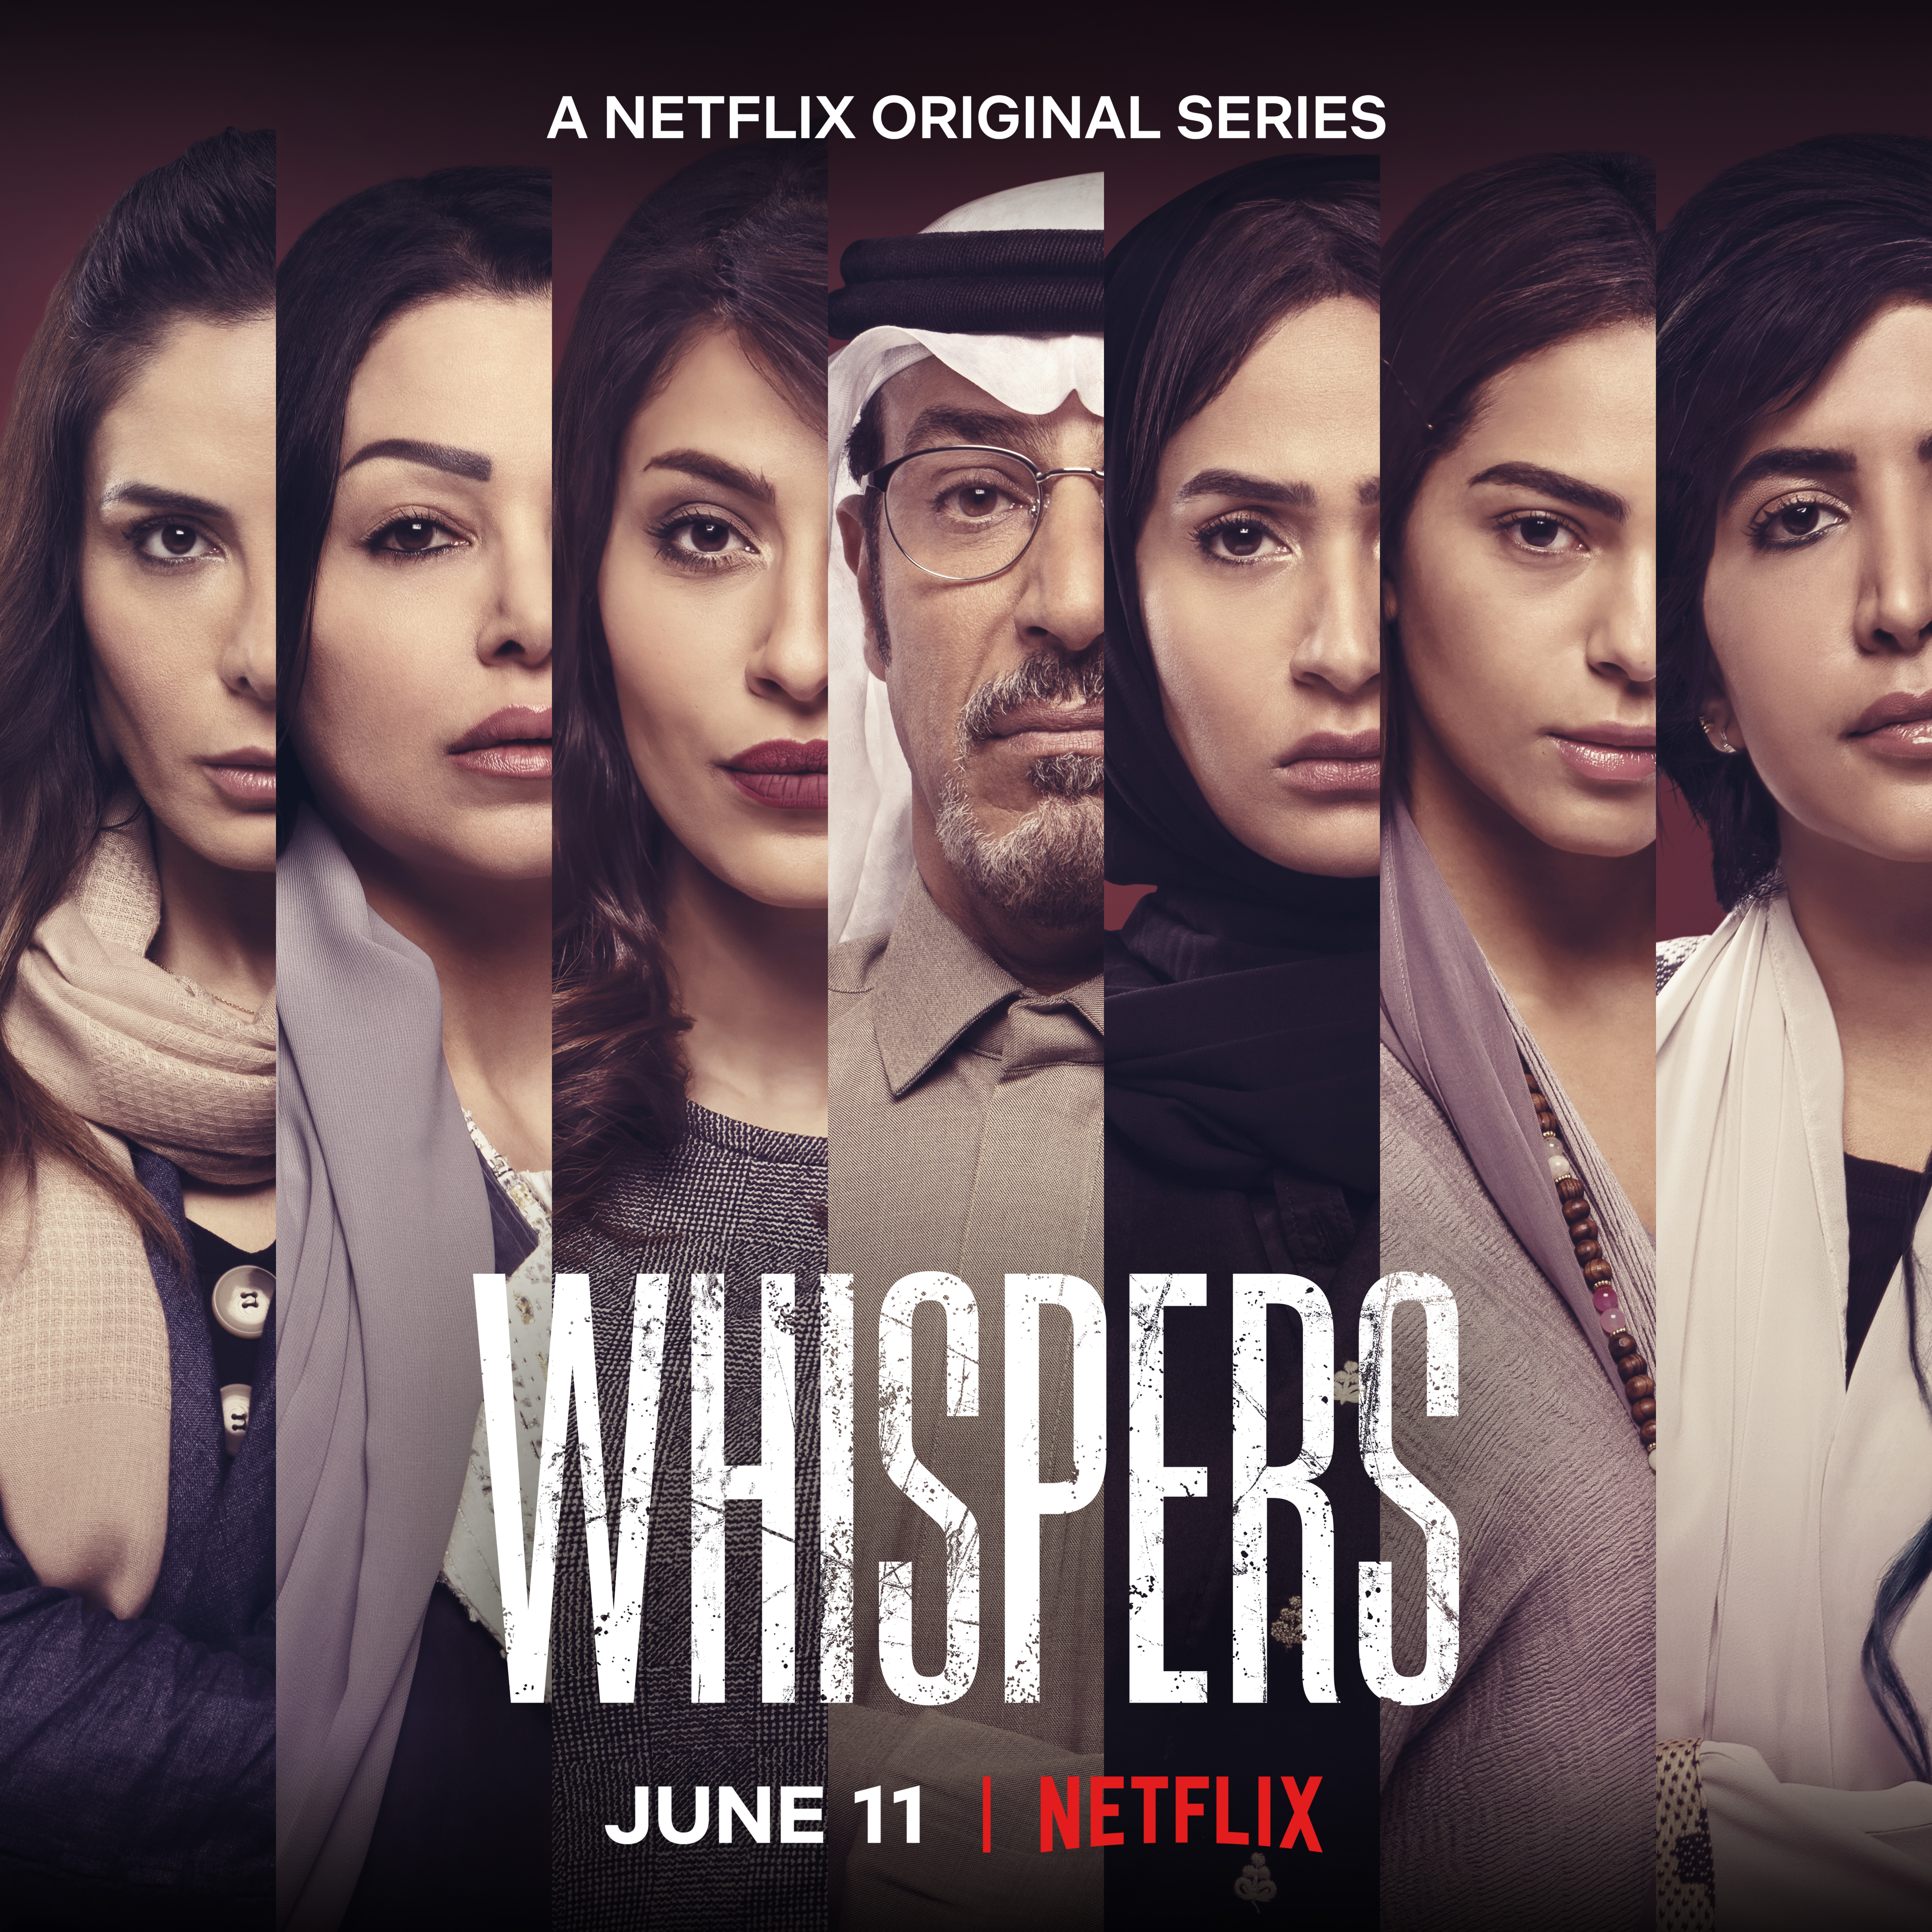 Whispers (2020)